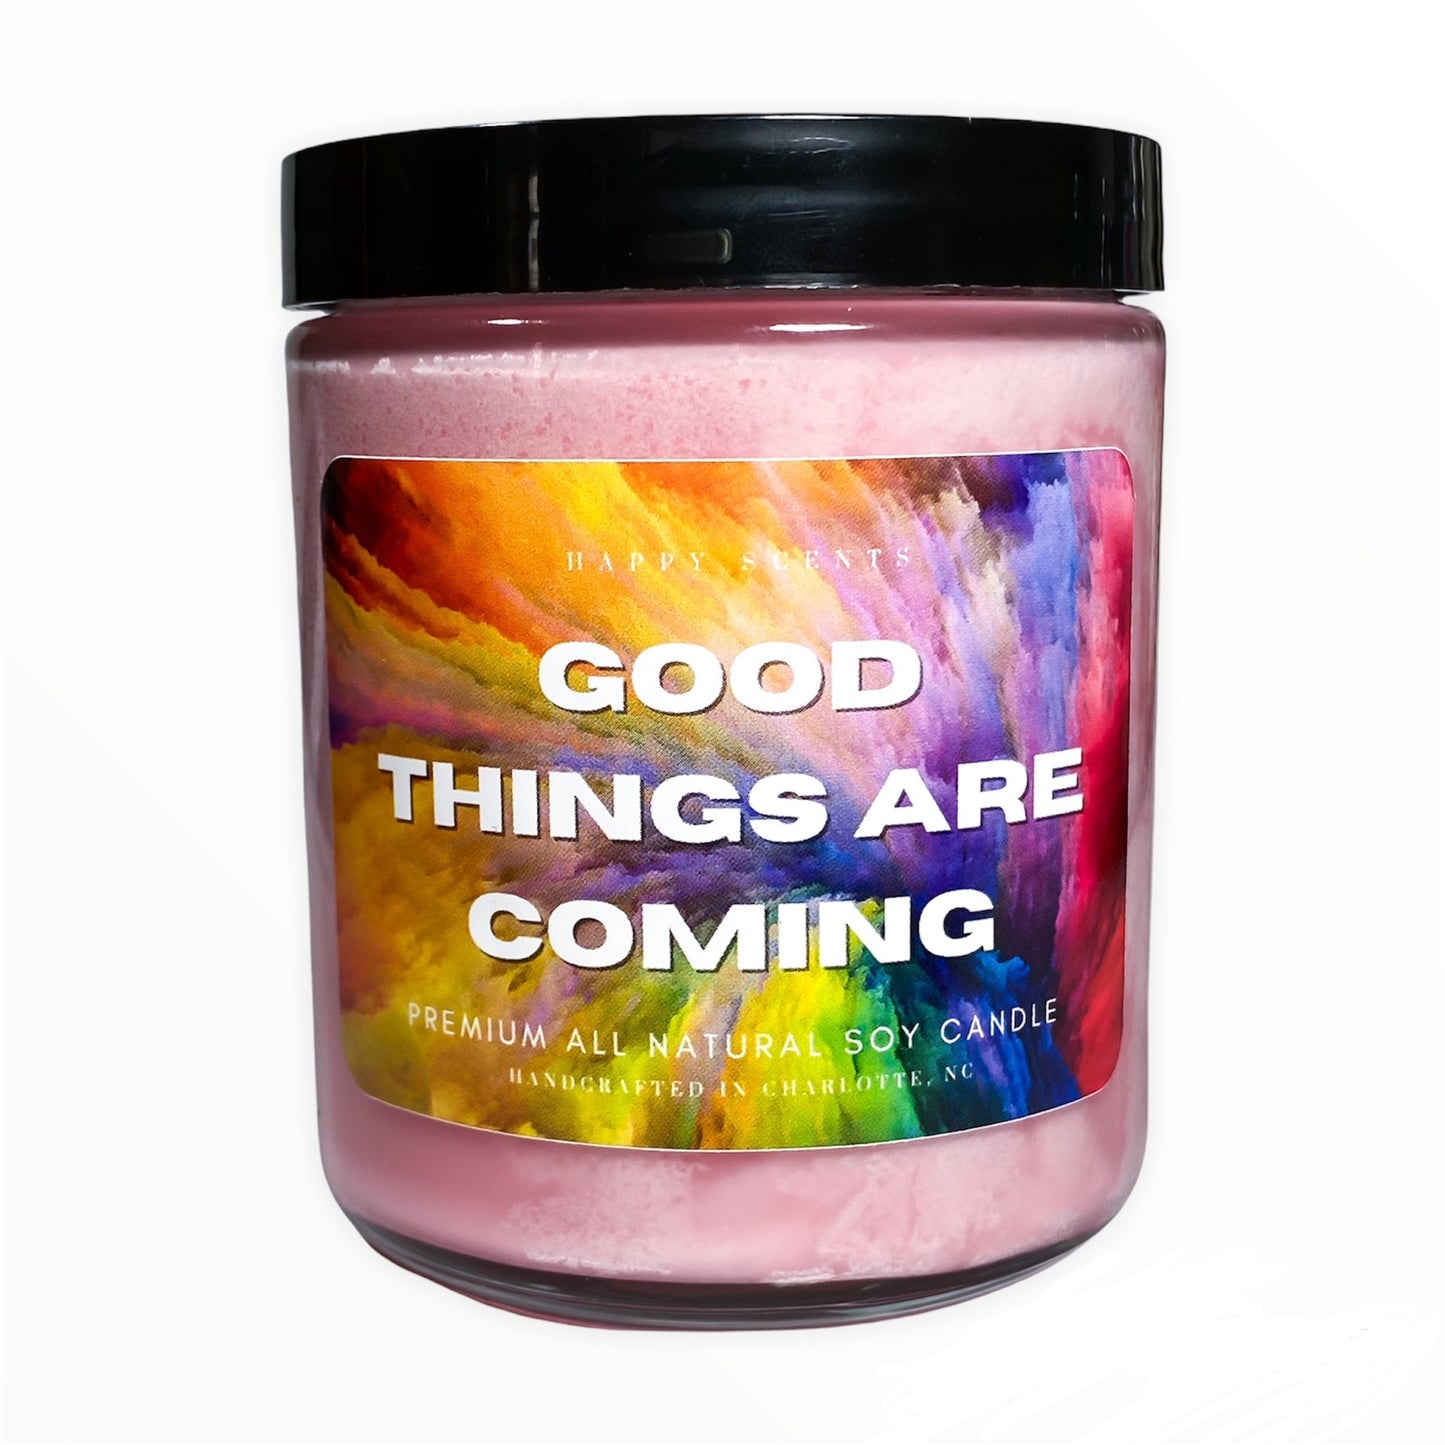 “Good Things are Coming" Quotable Jar Candle